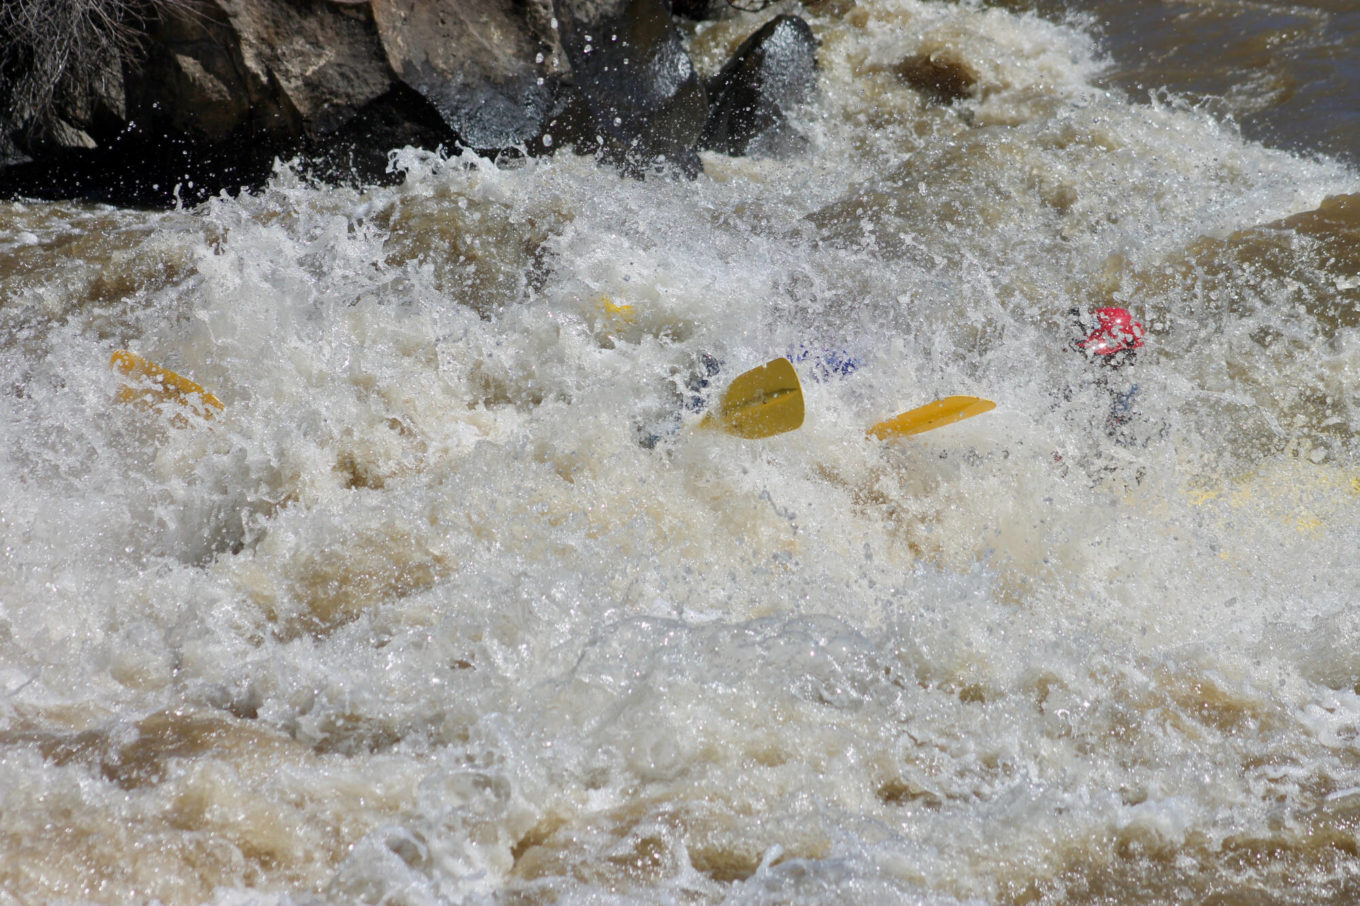 Rio Grande rafters going through the ultimate whitewater